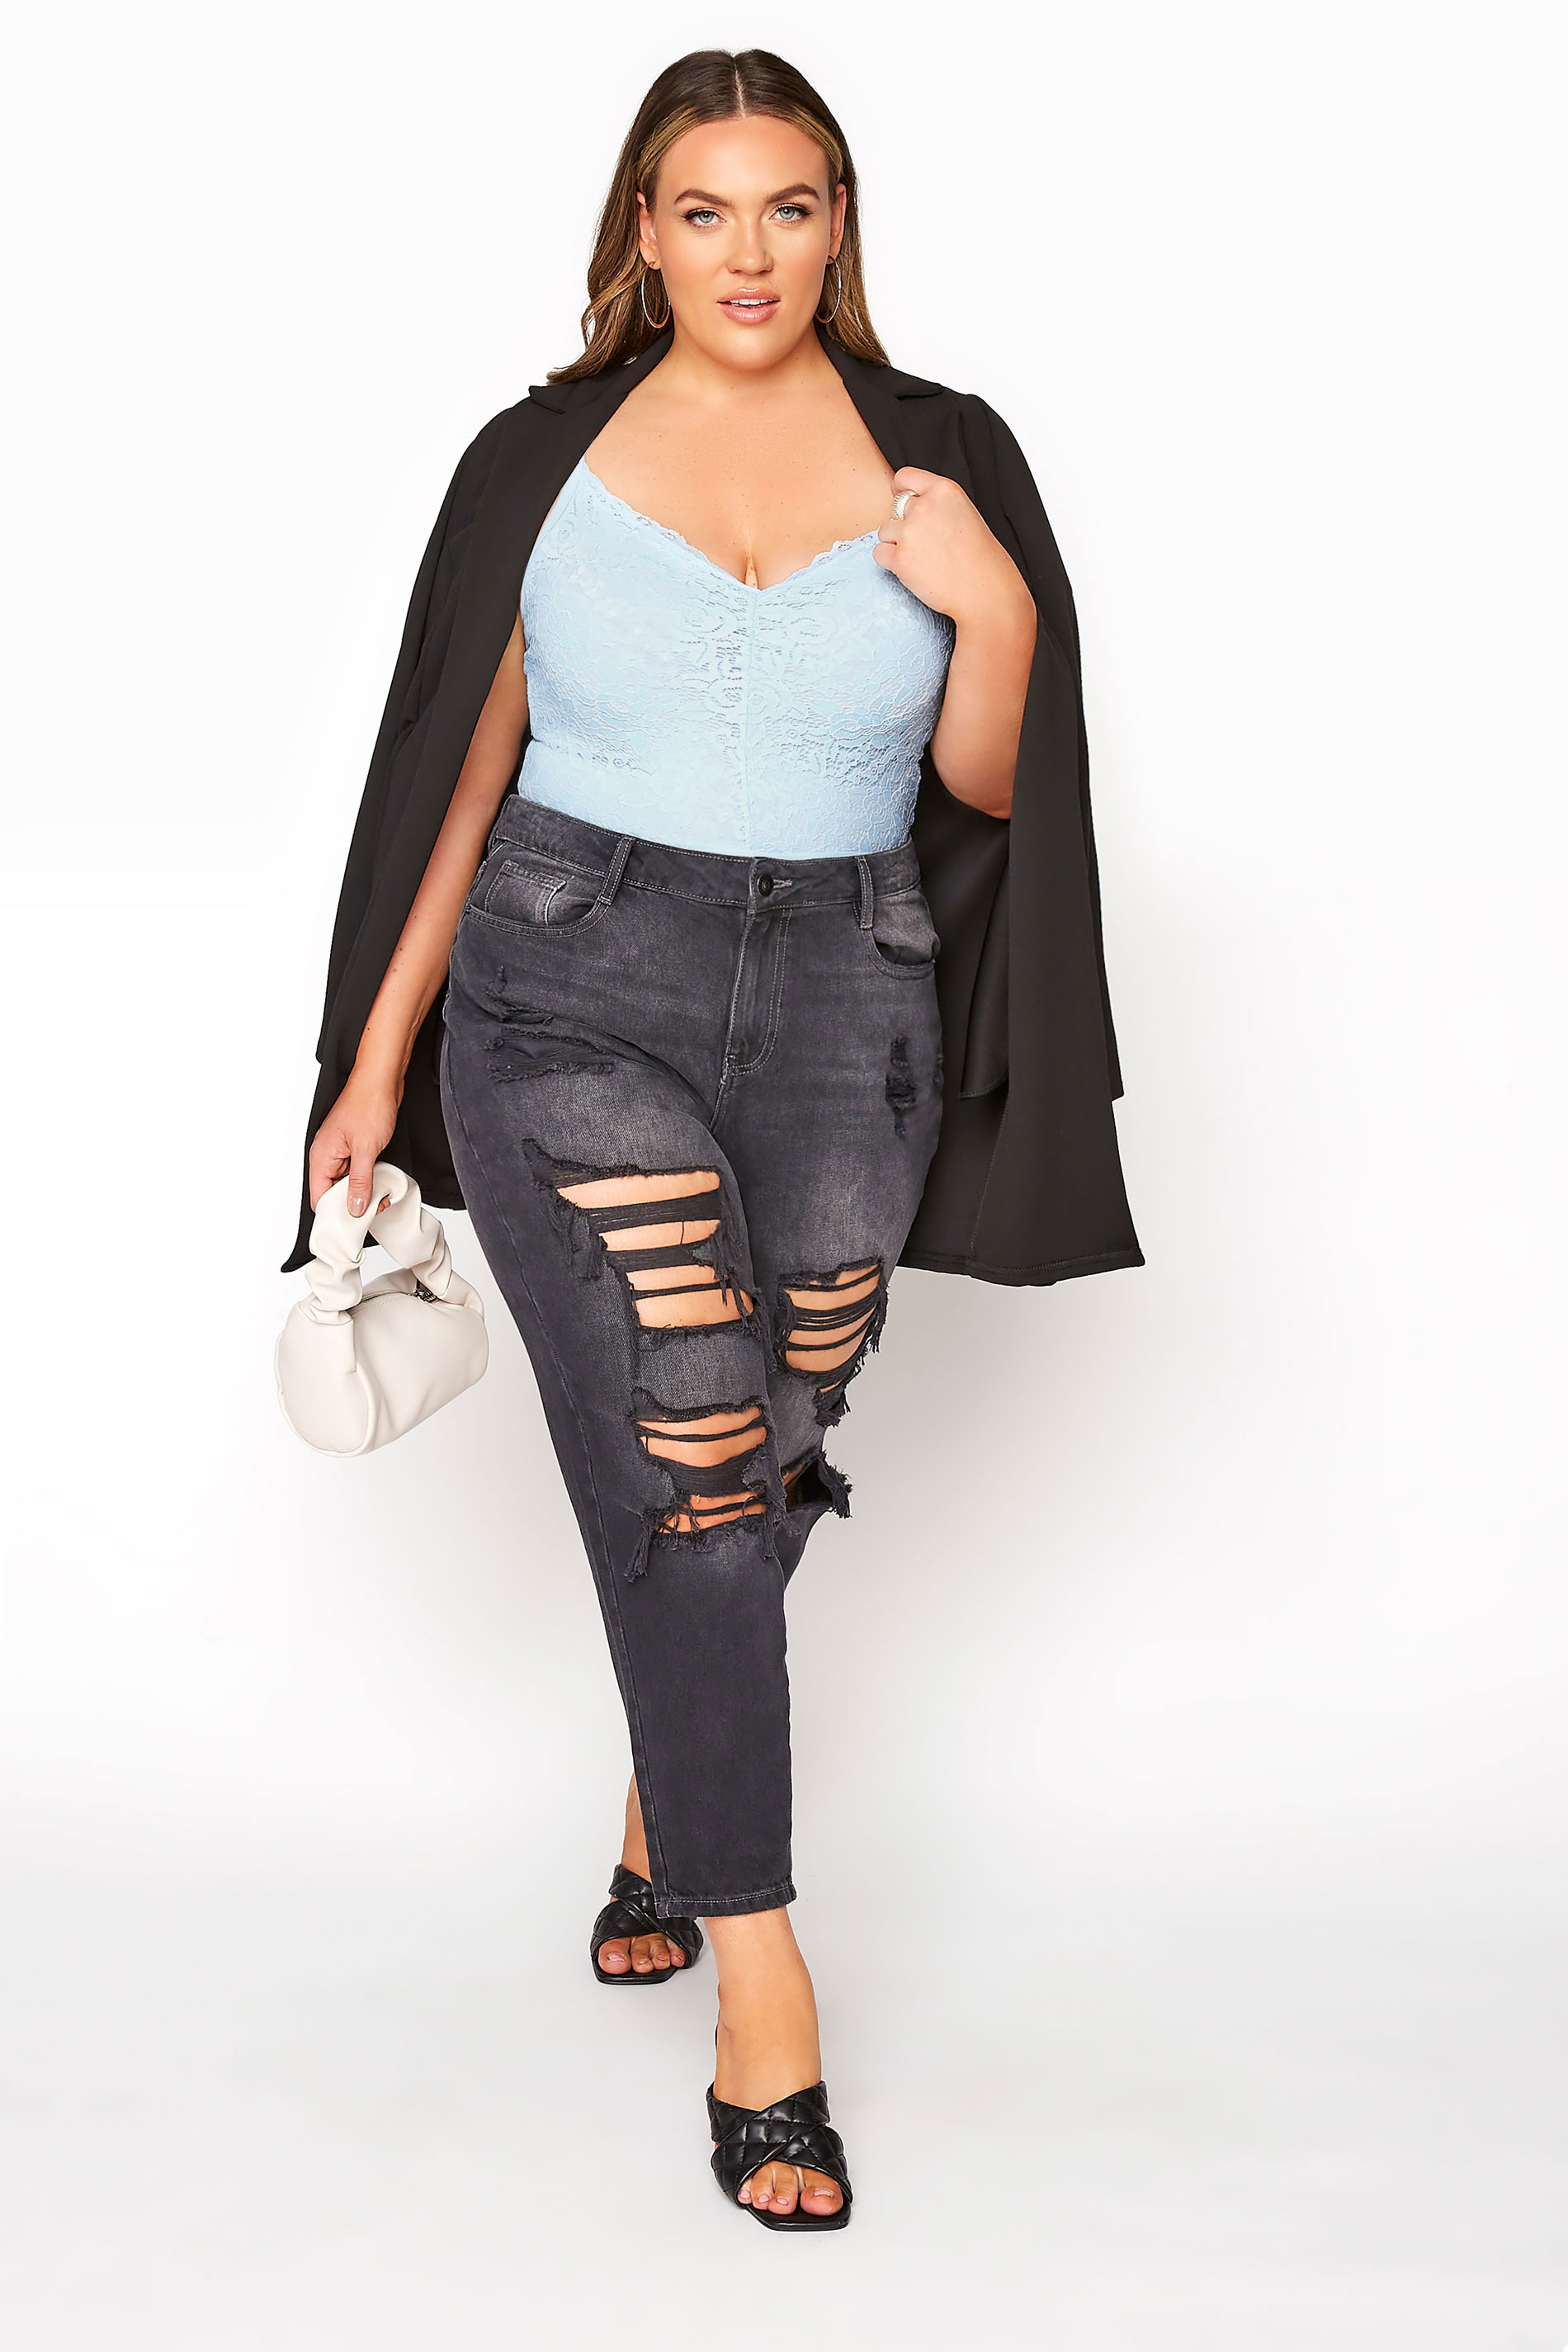 Plus Size LIMITED COLLECTION Baby Blue Lace Bodysuit | Yours Clothing